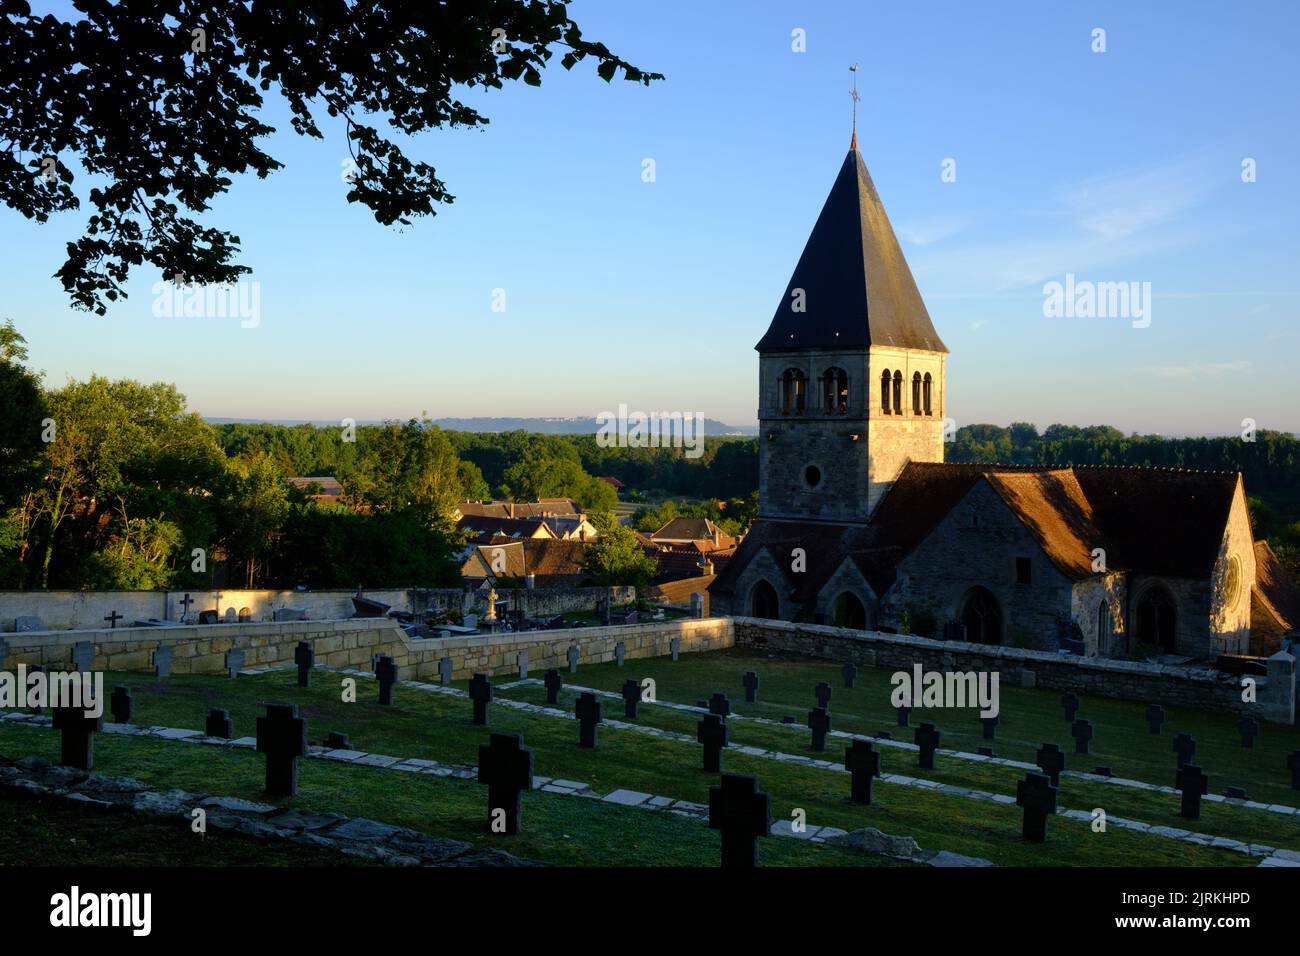 German war cemetery and church of Veslud, Aisne department, France Stock Photo